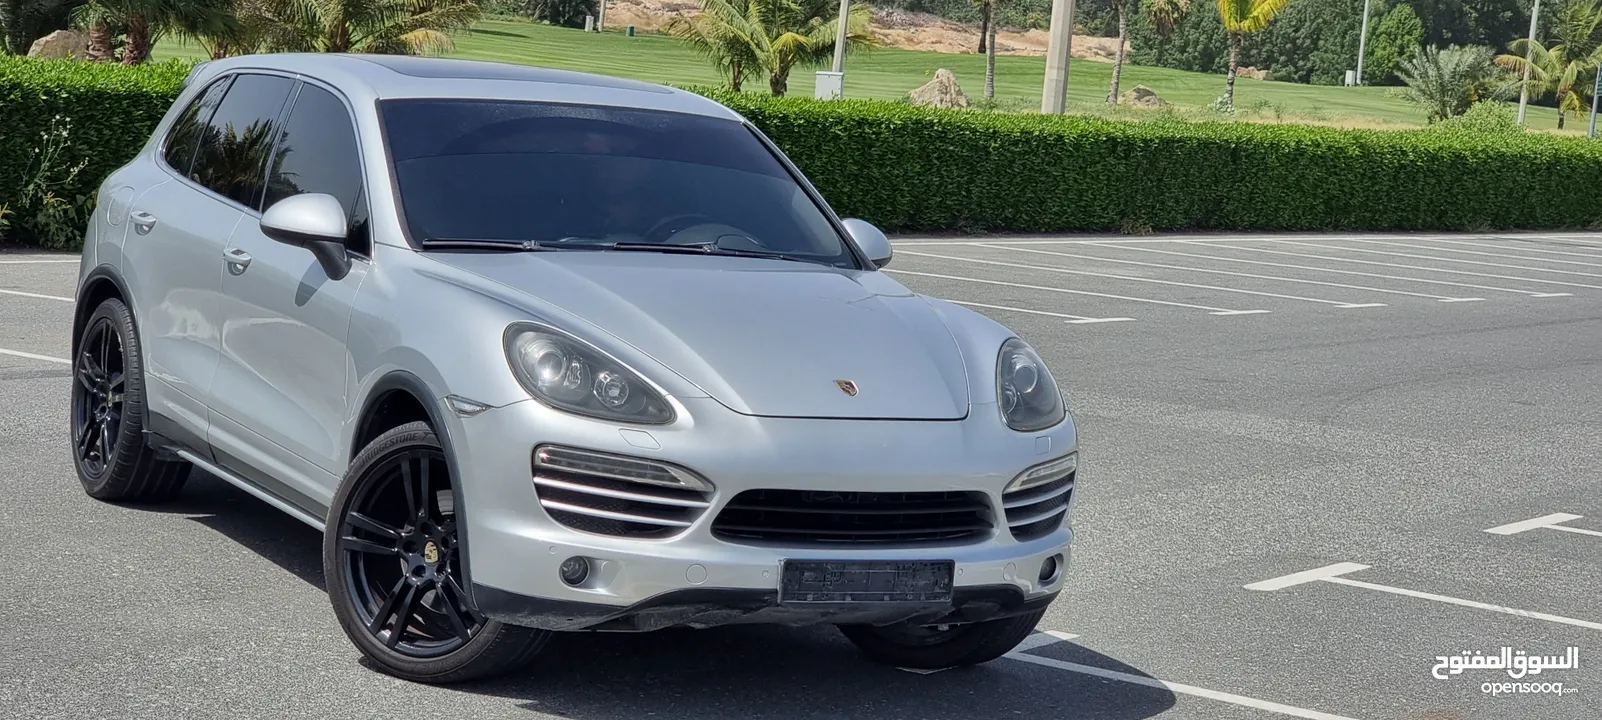 Porsche 6 cylinder / Gulf / 2012, panorama, number one, full specifications, agency condition